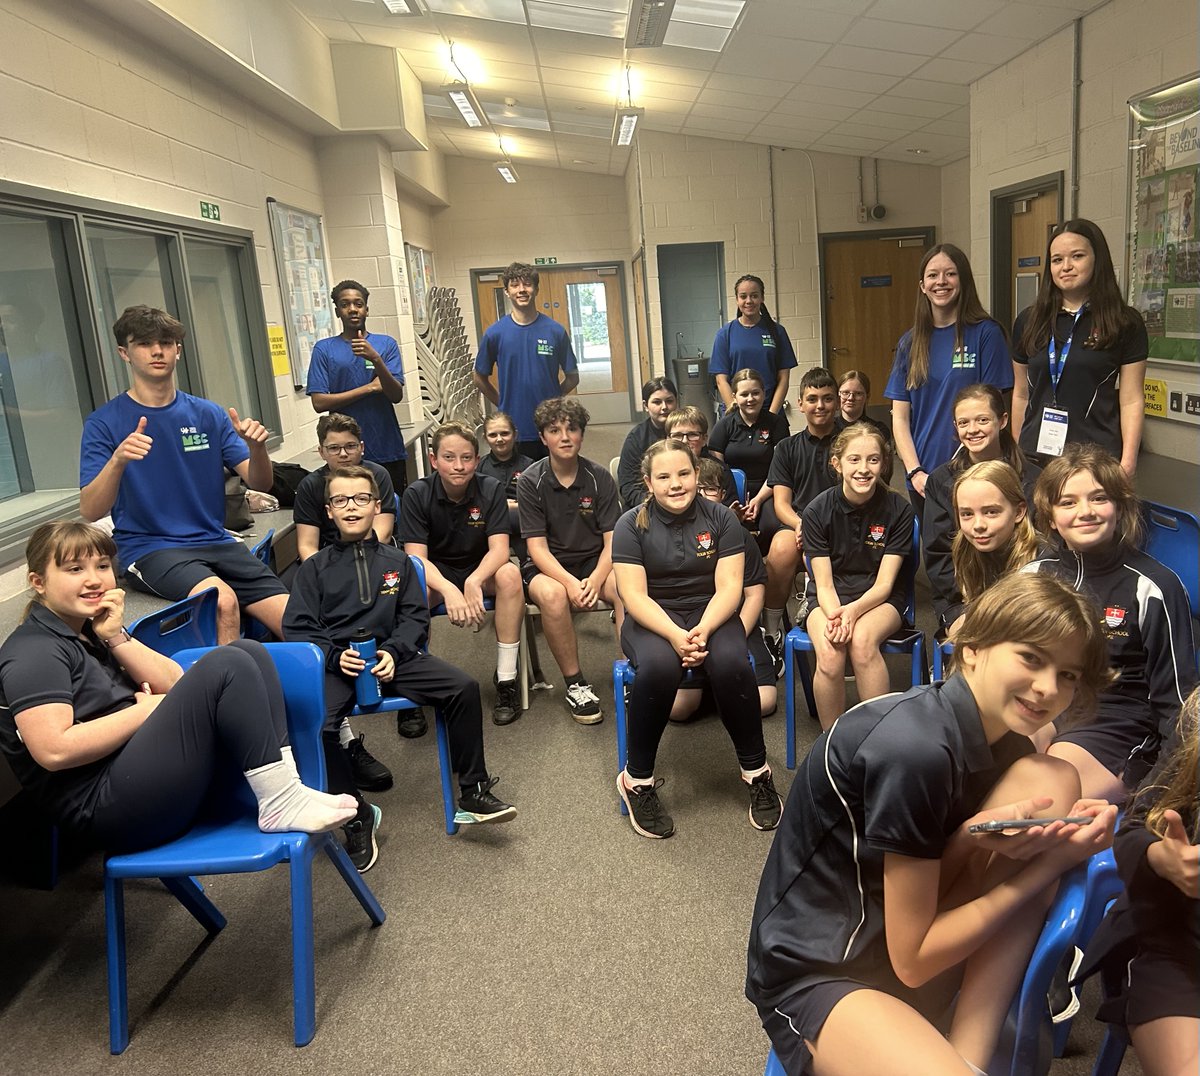 Wow Wow Wow 🤩 
Our multi sport leaders tonight made us exceptionally proud!! 
Our students who came along to join in were fabulous & it was so amazing to see them so engaged & happy. Teign students really are something special 🥰 @youthsporttrust #multisport #youngleaders